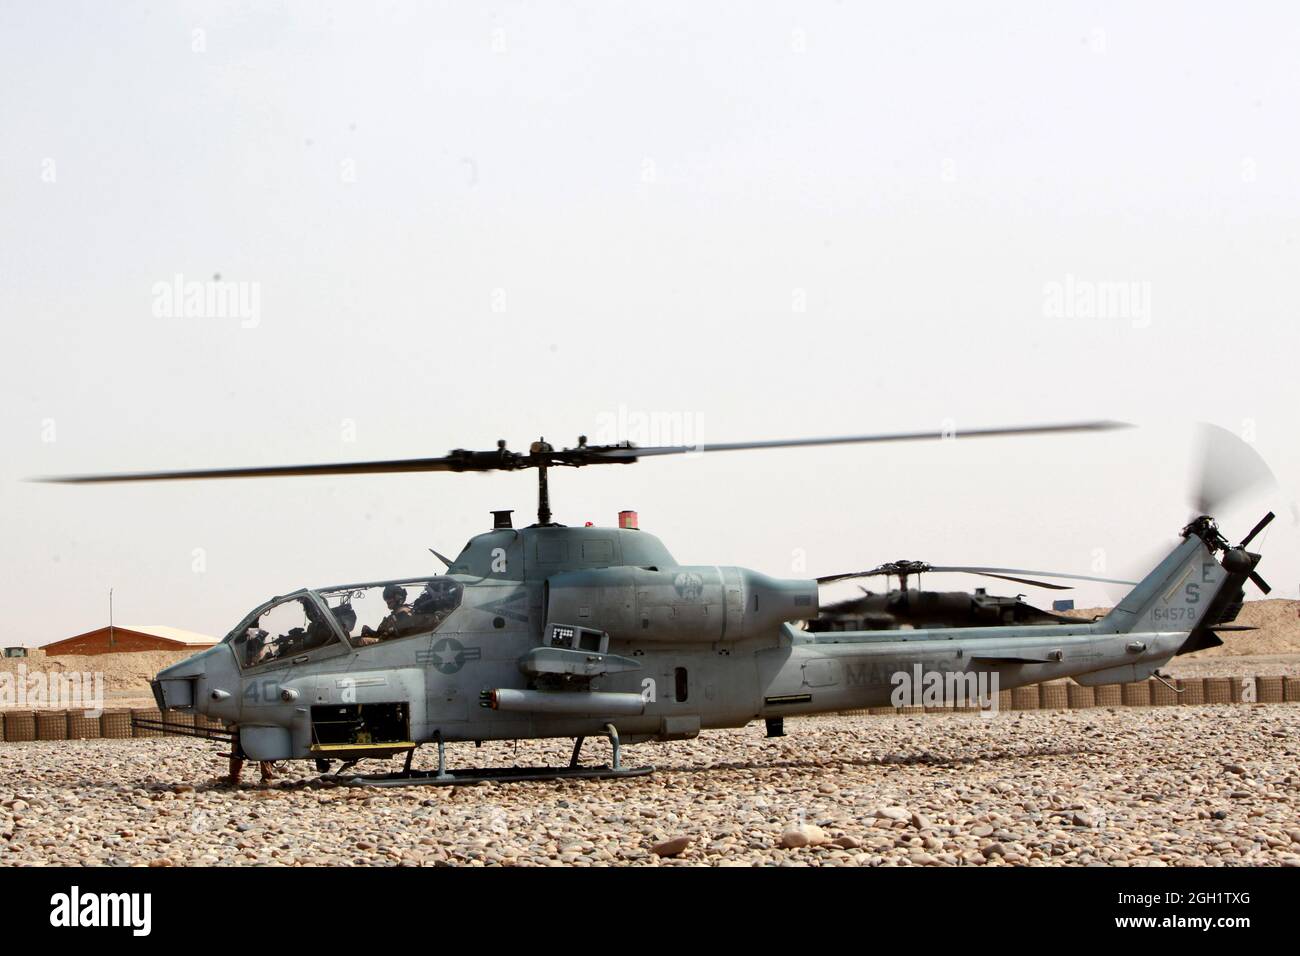 A U.S. Marine Corps AH-1W Cobra helicopter with Marine Light Attack Helicopter Squadron (HMLA) 469 awaits fuel prior to take off to provide aerial reconnaissance for Marines with 3rd Light Armored Reconnaissance (3rd LAR) Battalion in Helmand province, Afghanistan on June 20, 2012. HMLA-469 provided aerial reconnaissance and security for the Marines of 3rd LAR during operation Halberd V to prevent the distribution of contraband in support of counter insurgency operations. Stock Photo